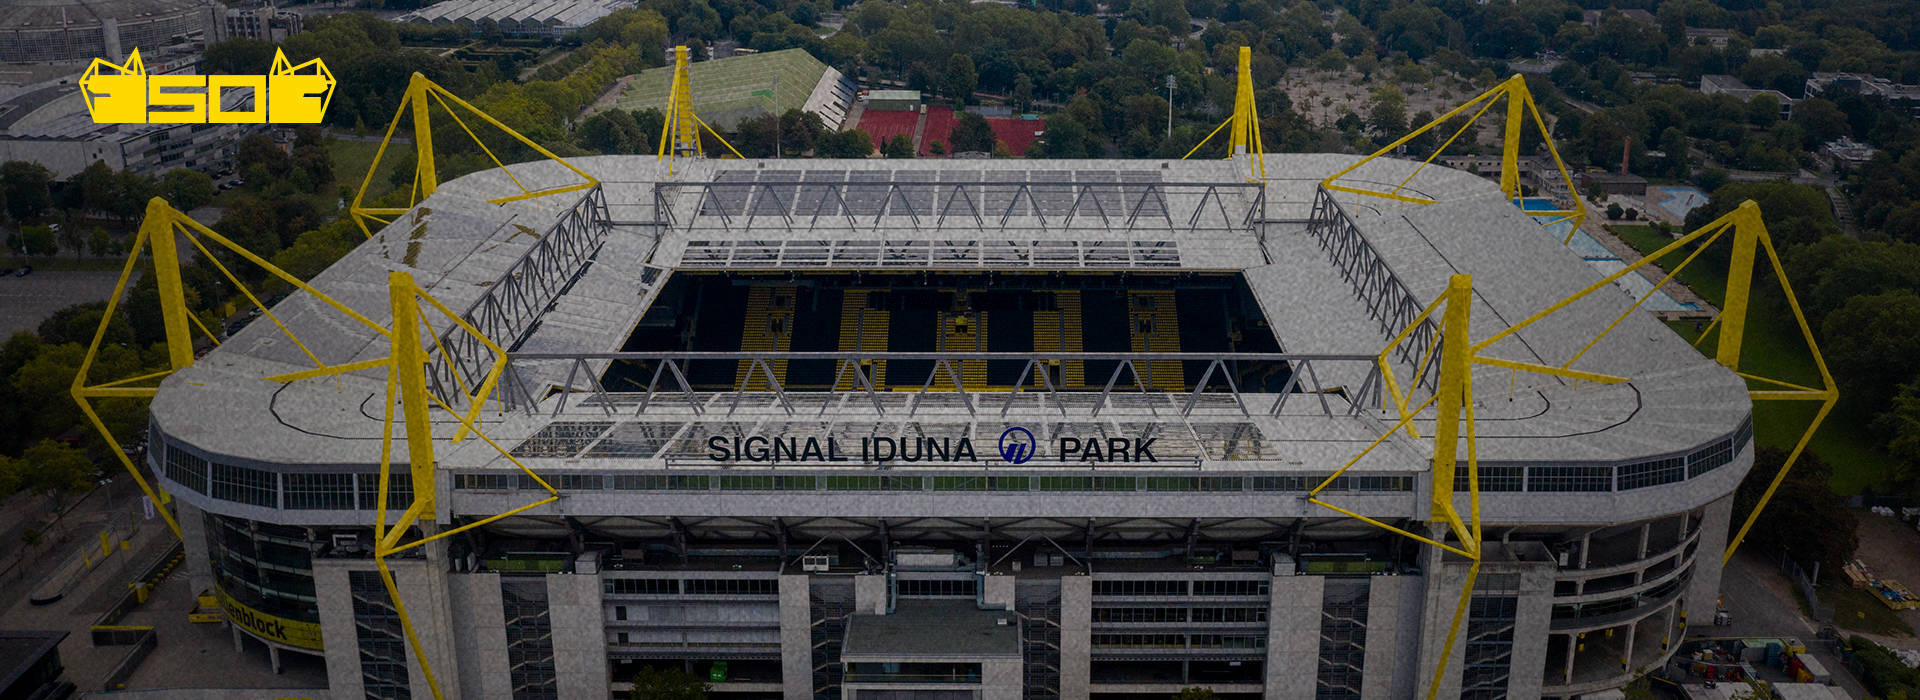 50 years of the world's most beautiful stadium – BVB invite you to join in